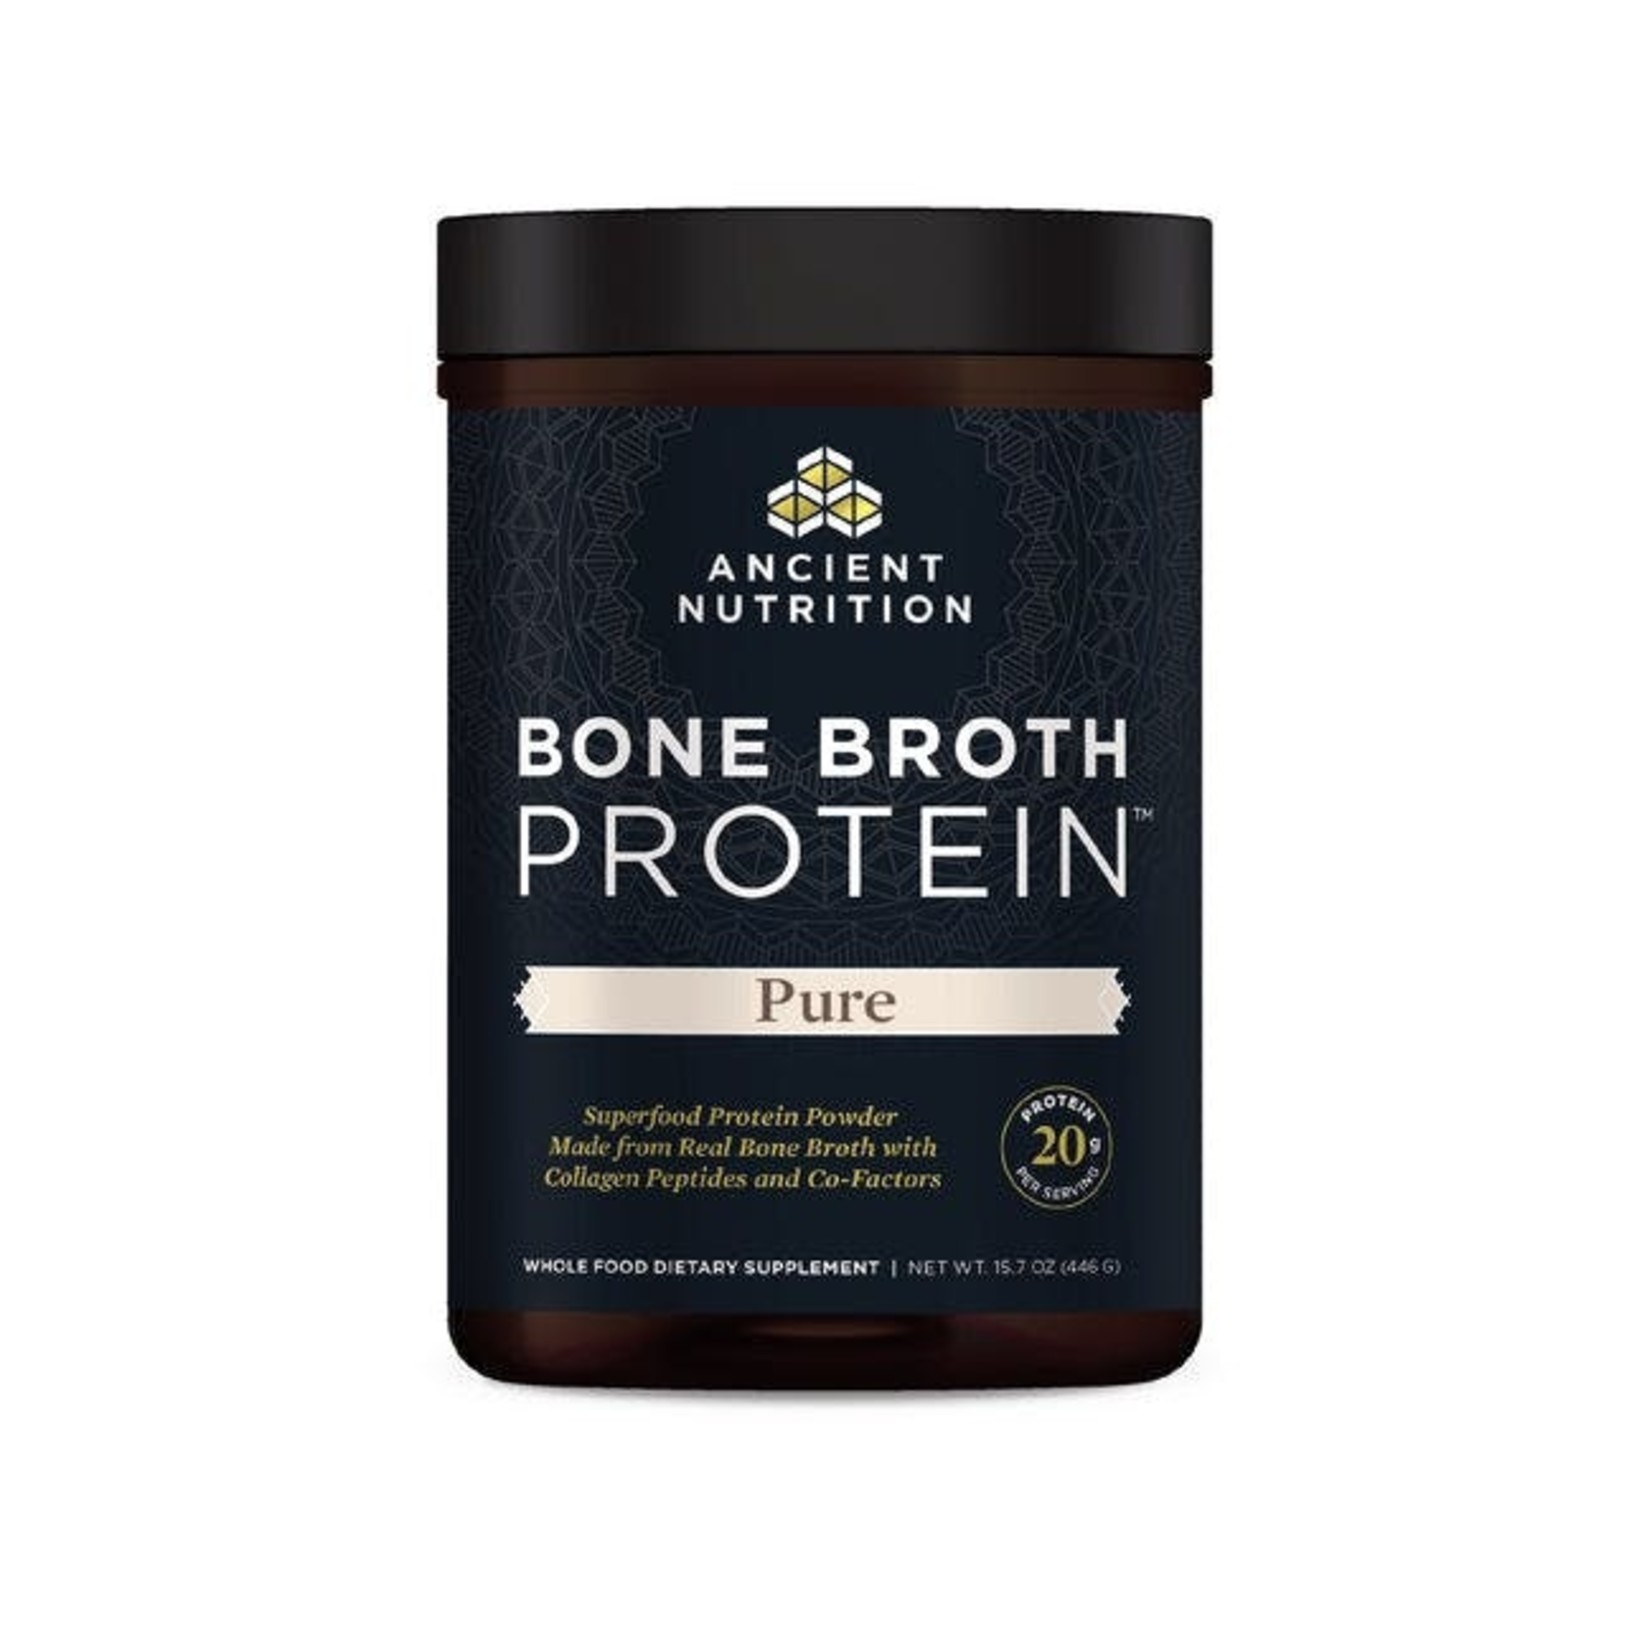 Ancient Nutrition Ancient Nutrition - Bone Broth Protein Pure - 15.7 oz